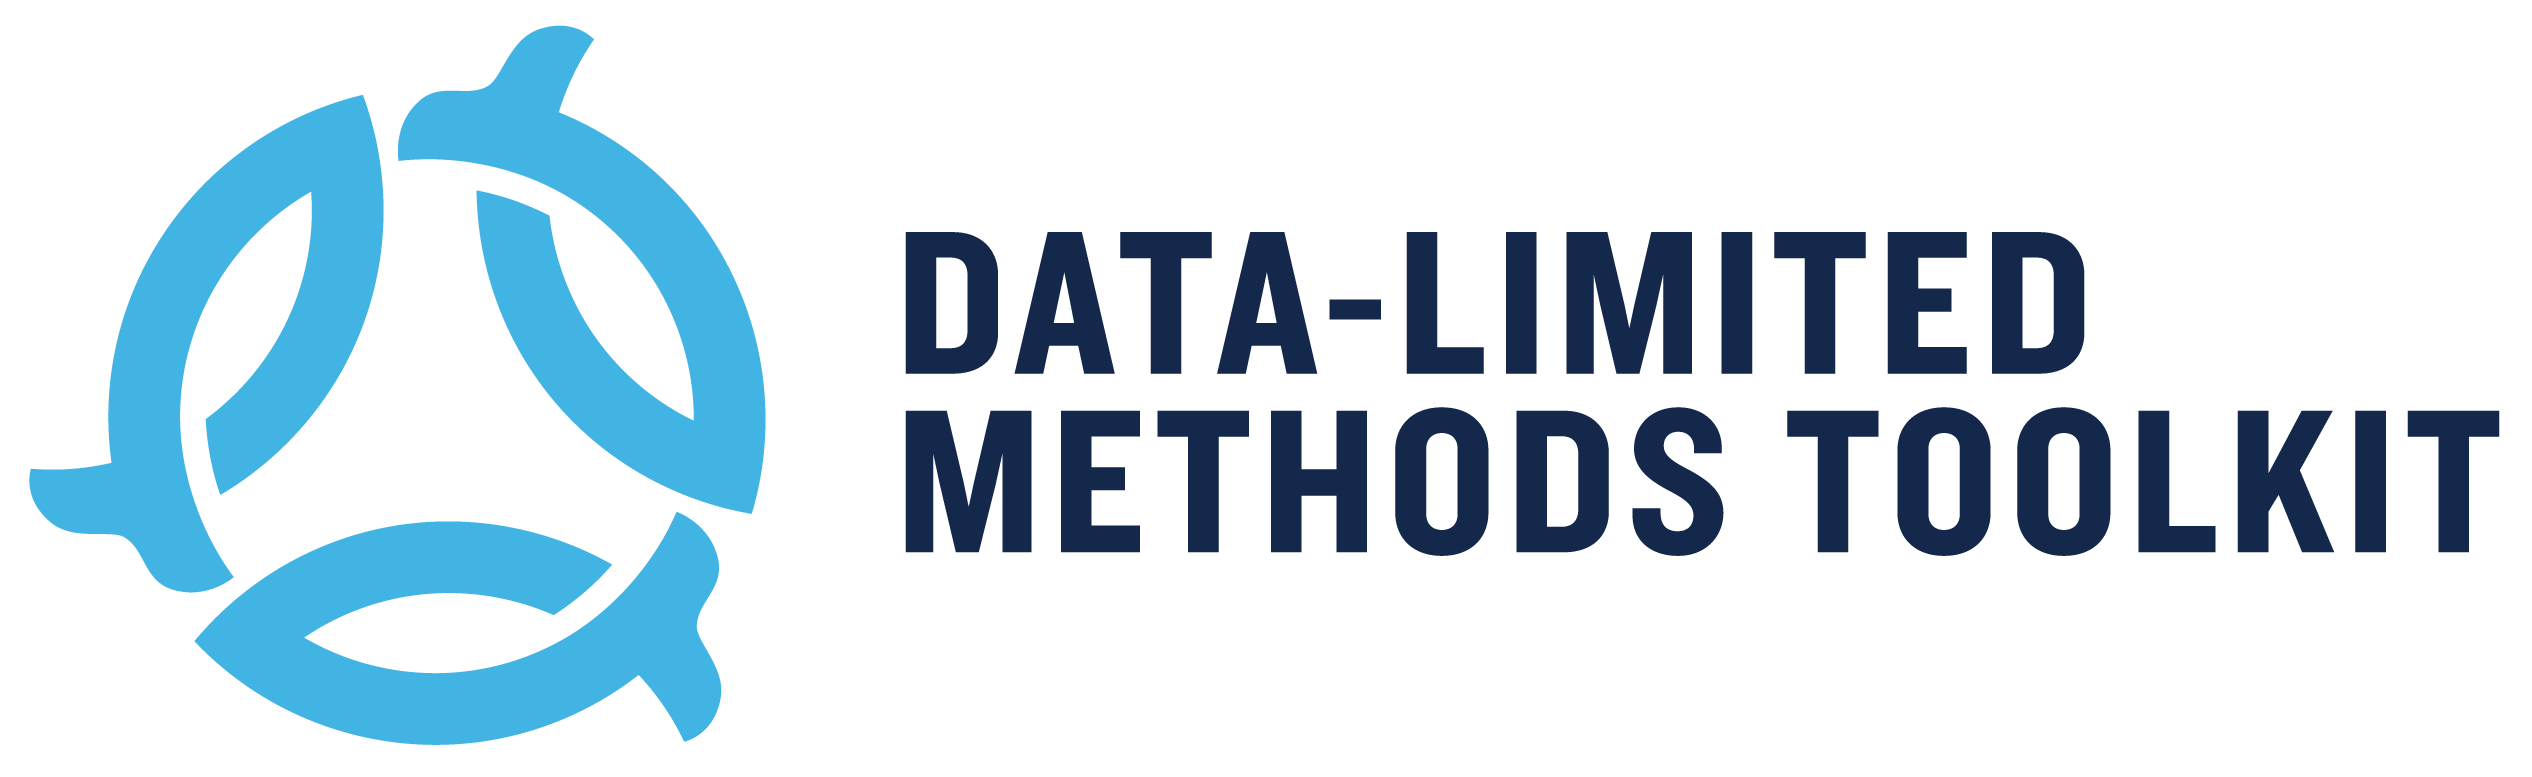 Data-Limited Methods Toolkit (DLMtool) - Management Strategy Evaluation for Data-Limited Fisheries